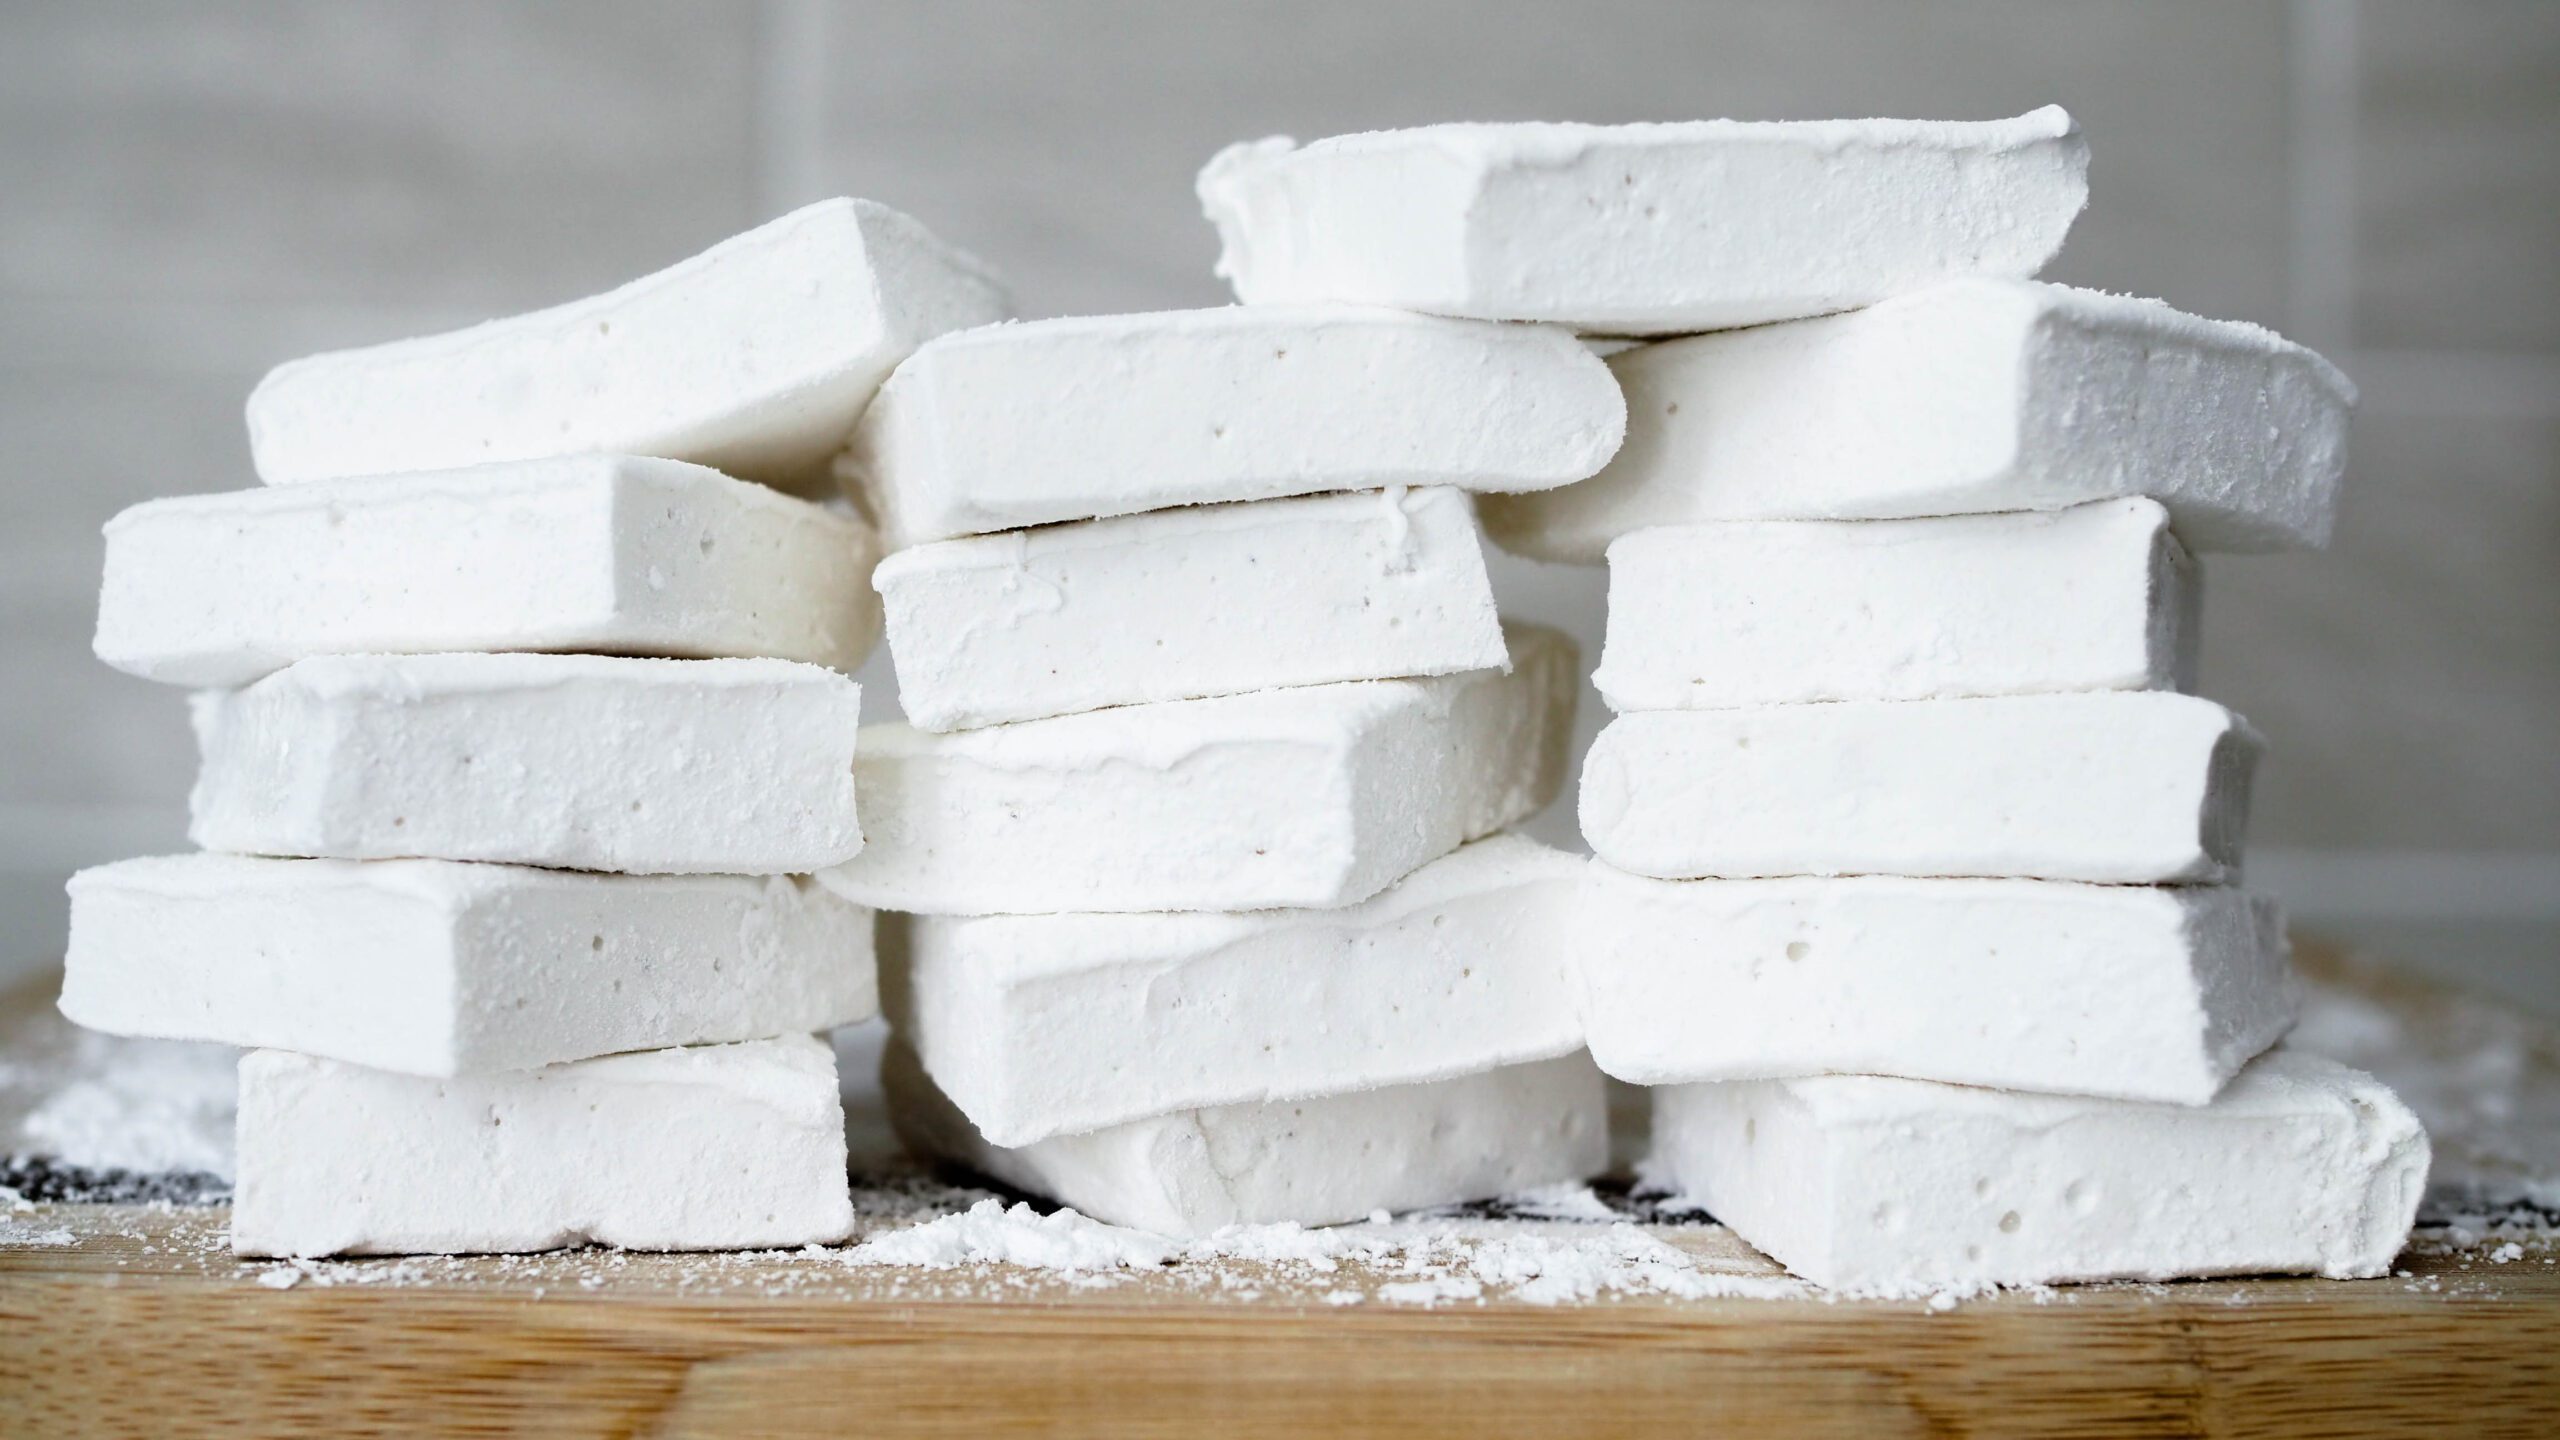 A stack of marshmallows on a wooden cutting board.